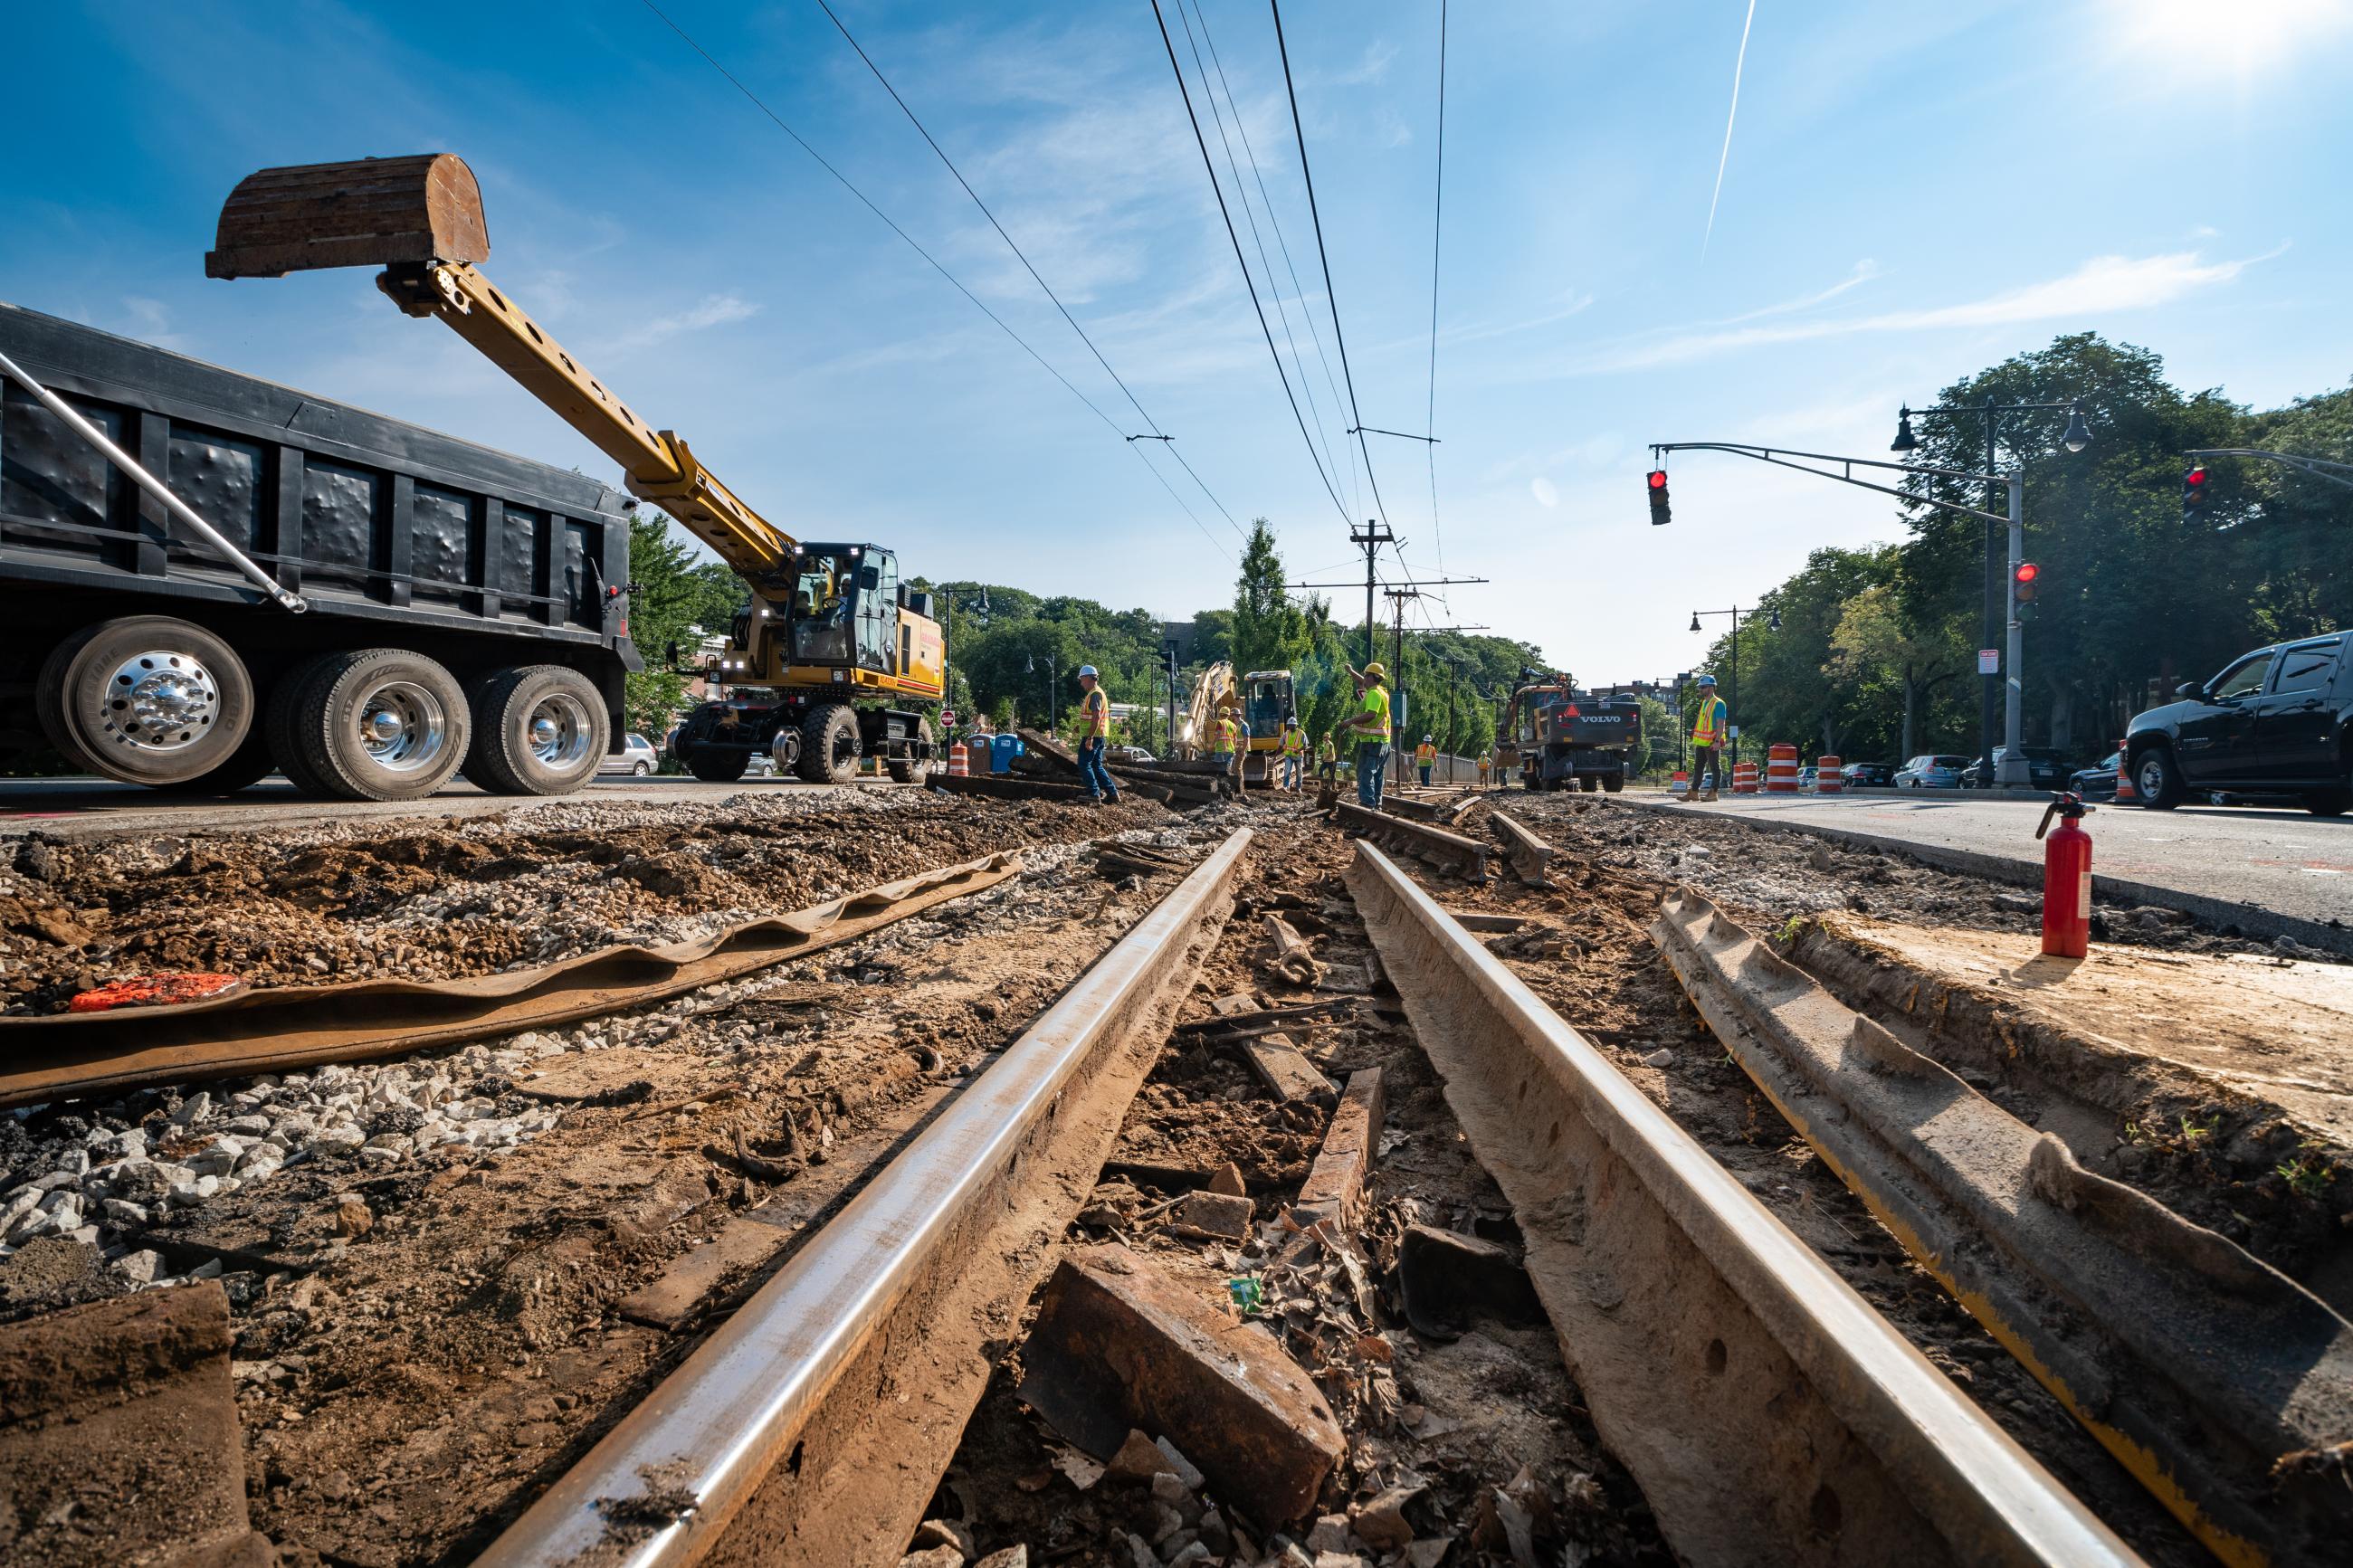 Track work on the Green Line B Branch during summer 2018.